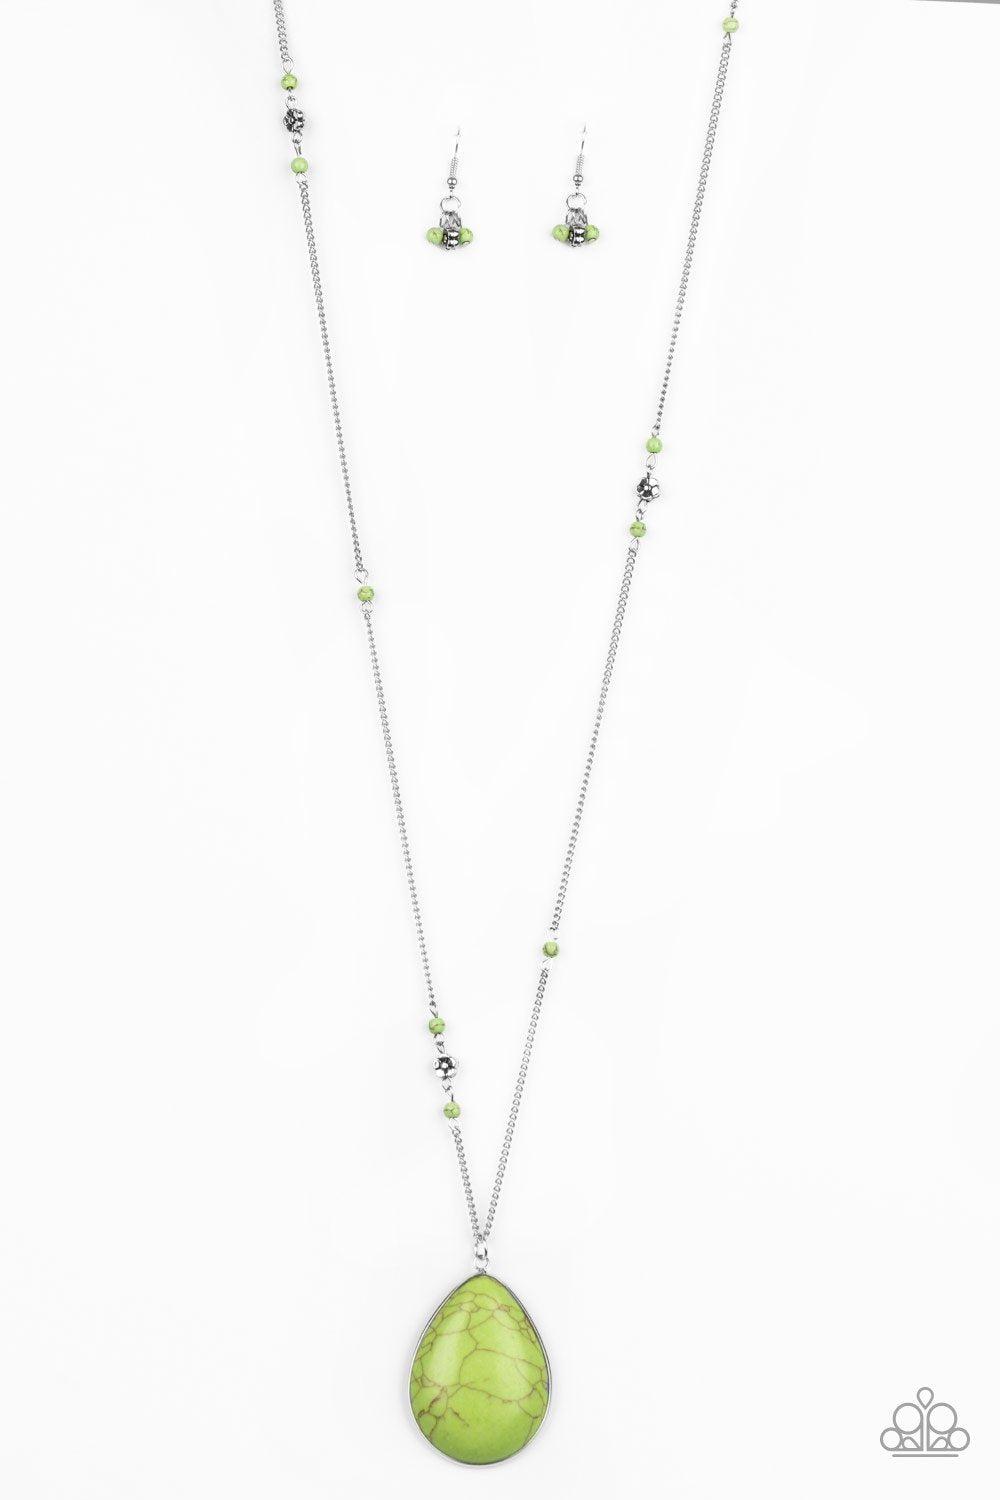 Desert Meadow Green Stone Necklace - Paparazzi Accessories-CarasShop.com - $5 Jewelry by Cara Jewels